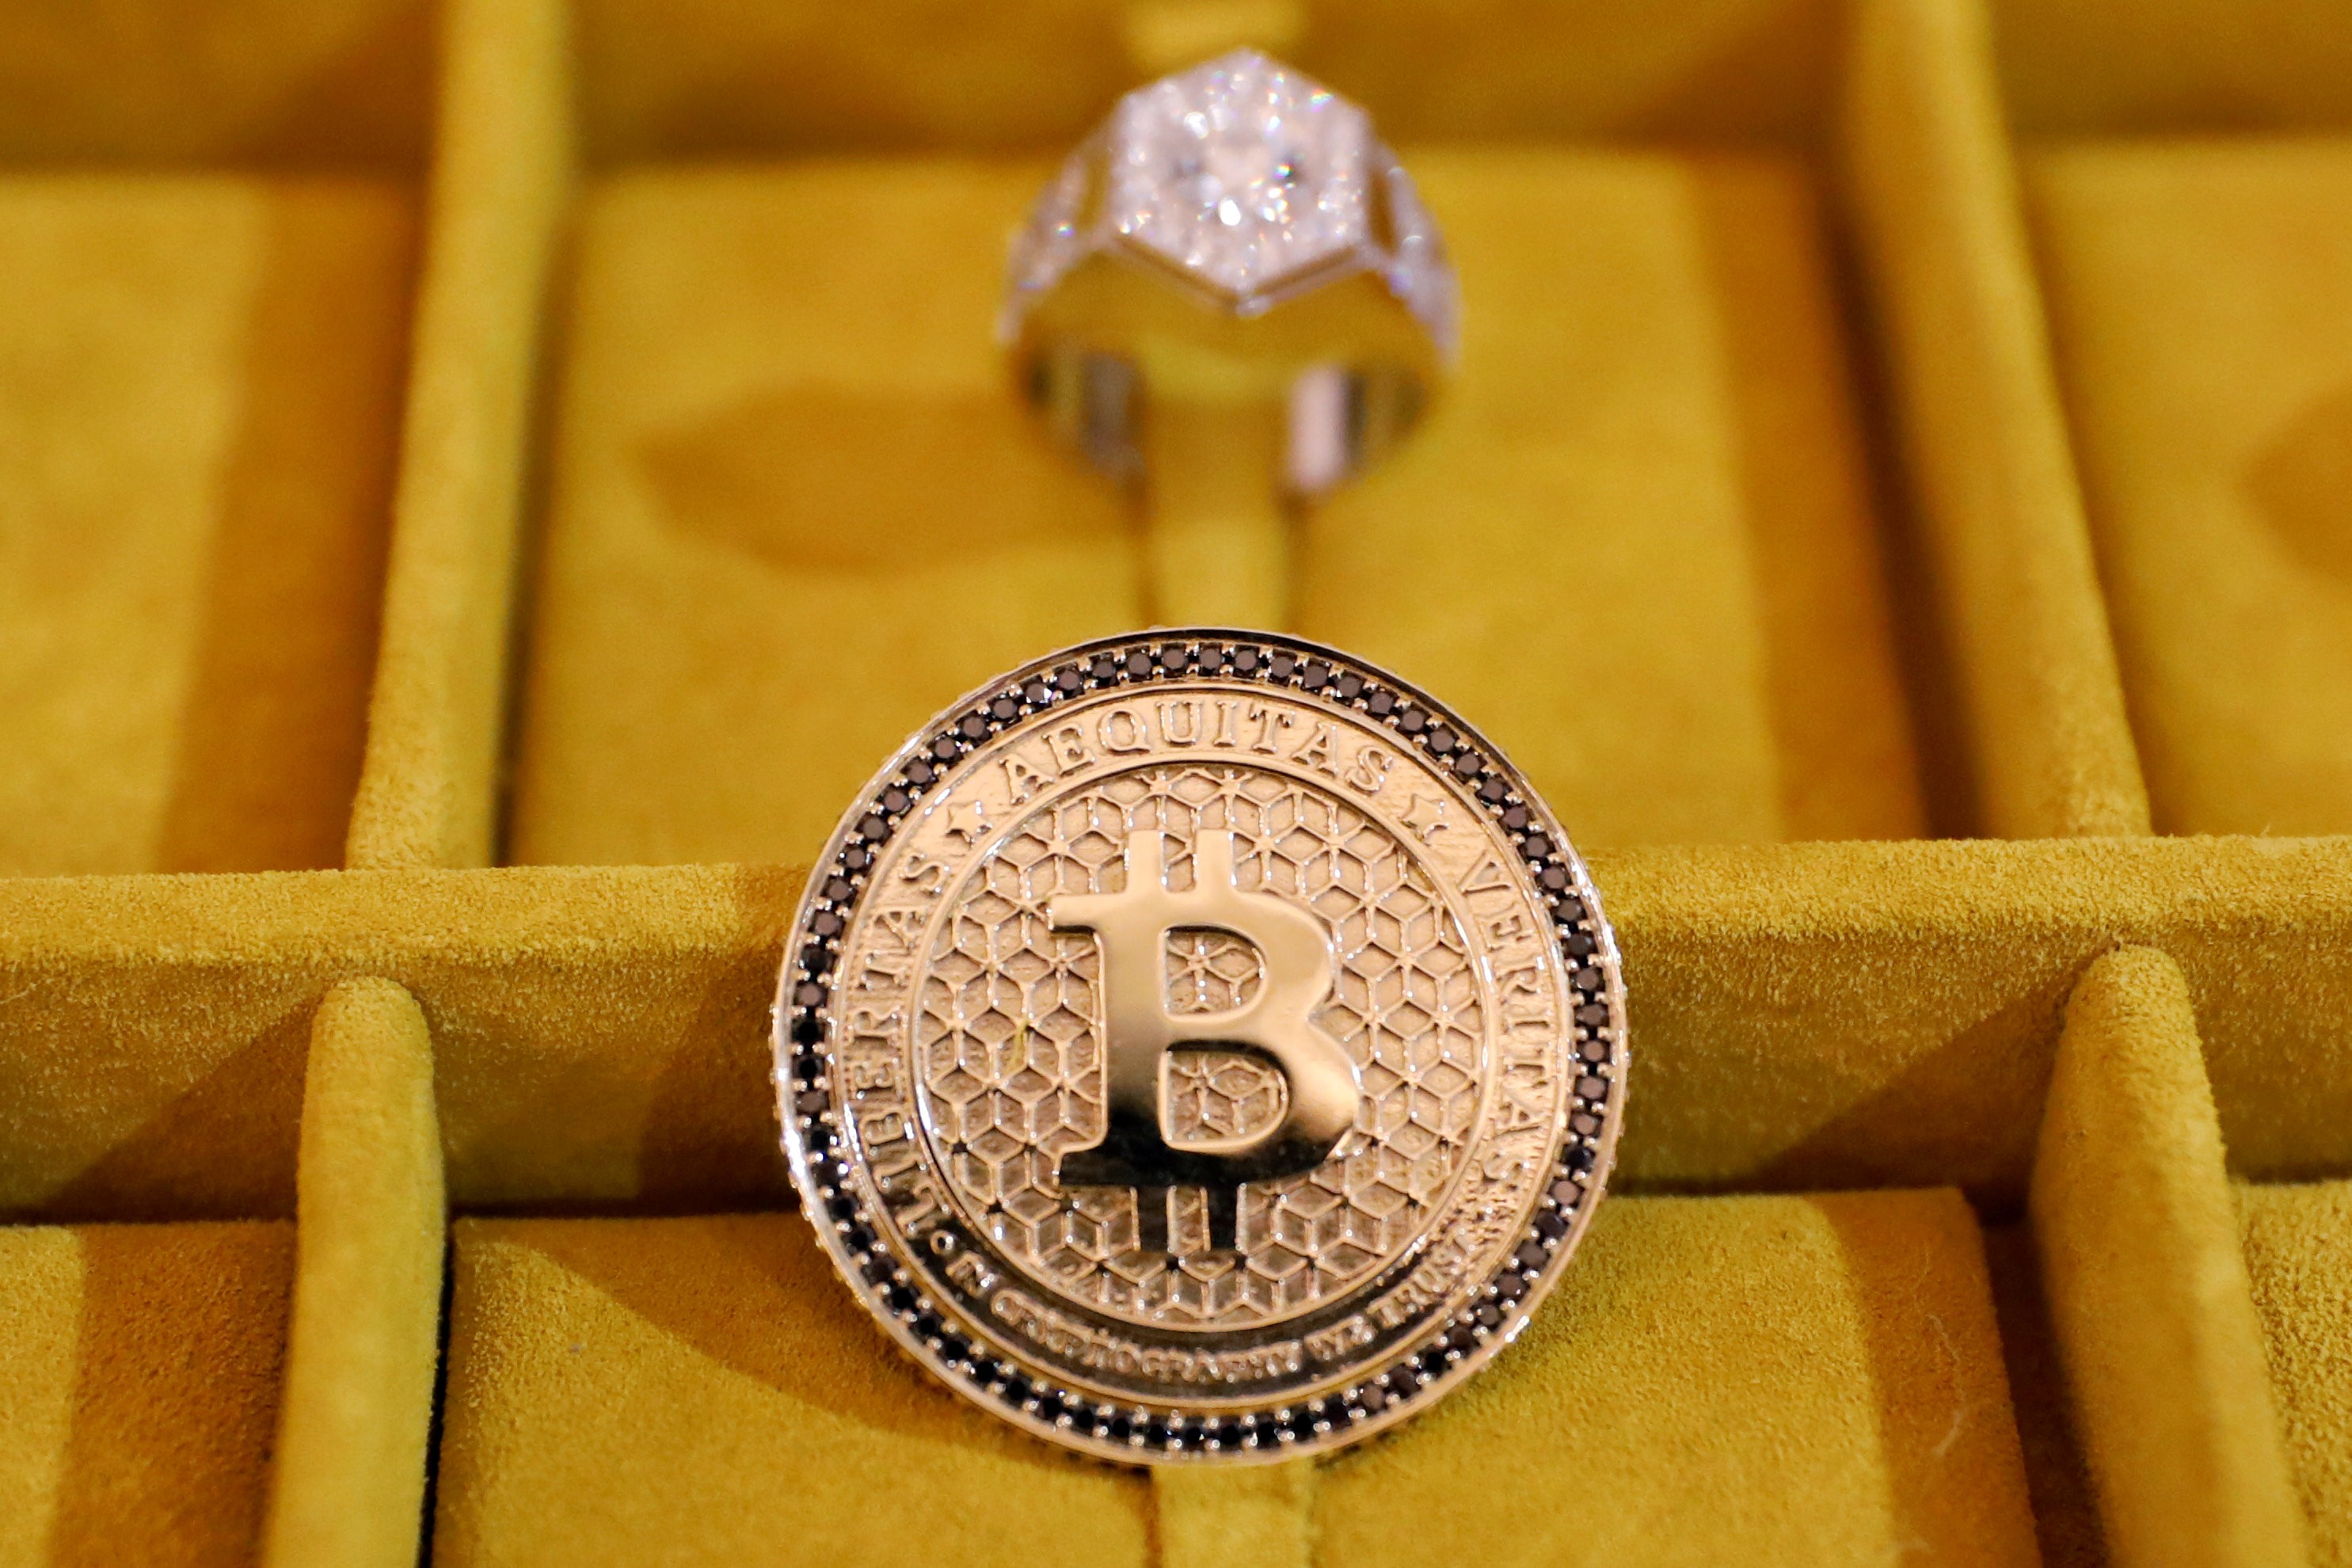 Bitcoin is one of many blockchain technologies that maintain a data list that is encrypted to prevent tampering and revision. Such technologies can be used to track a diamond’s journey from mine to retailPhoto: Reuters